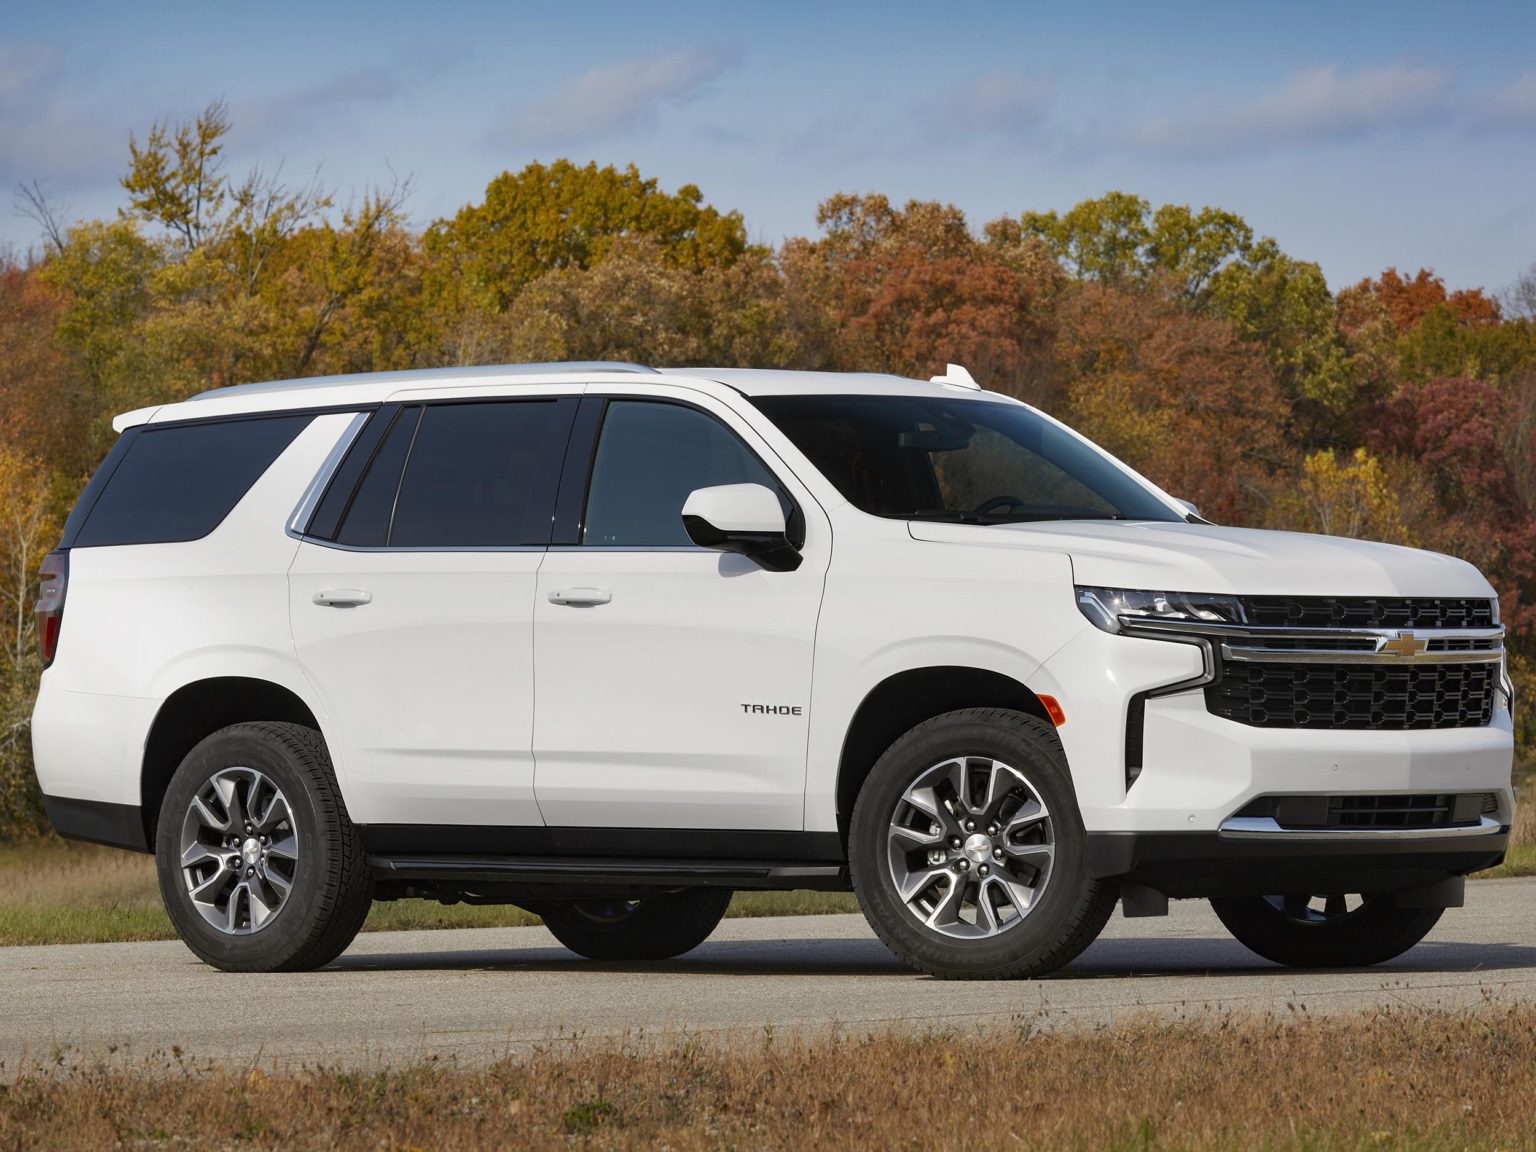 The 2021 Chevrolet Tahoe offers best-in-class fuel economy.